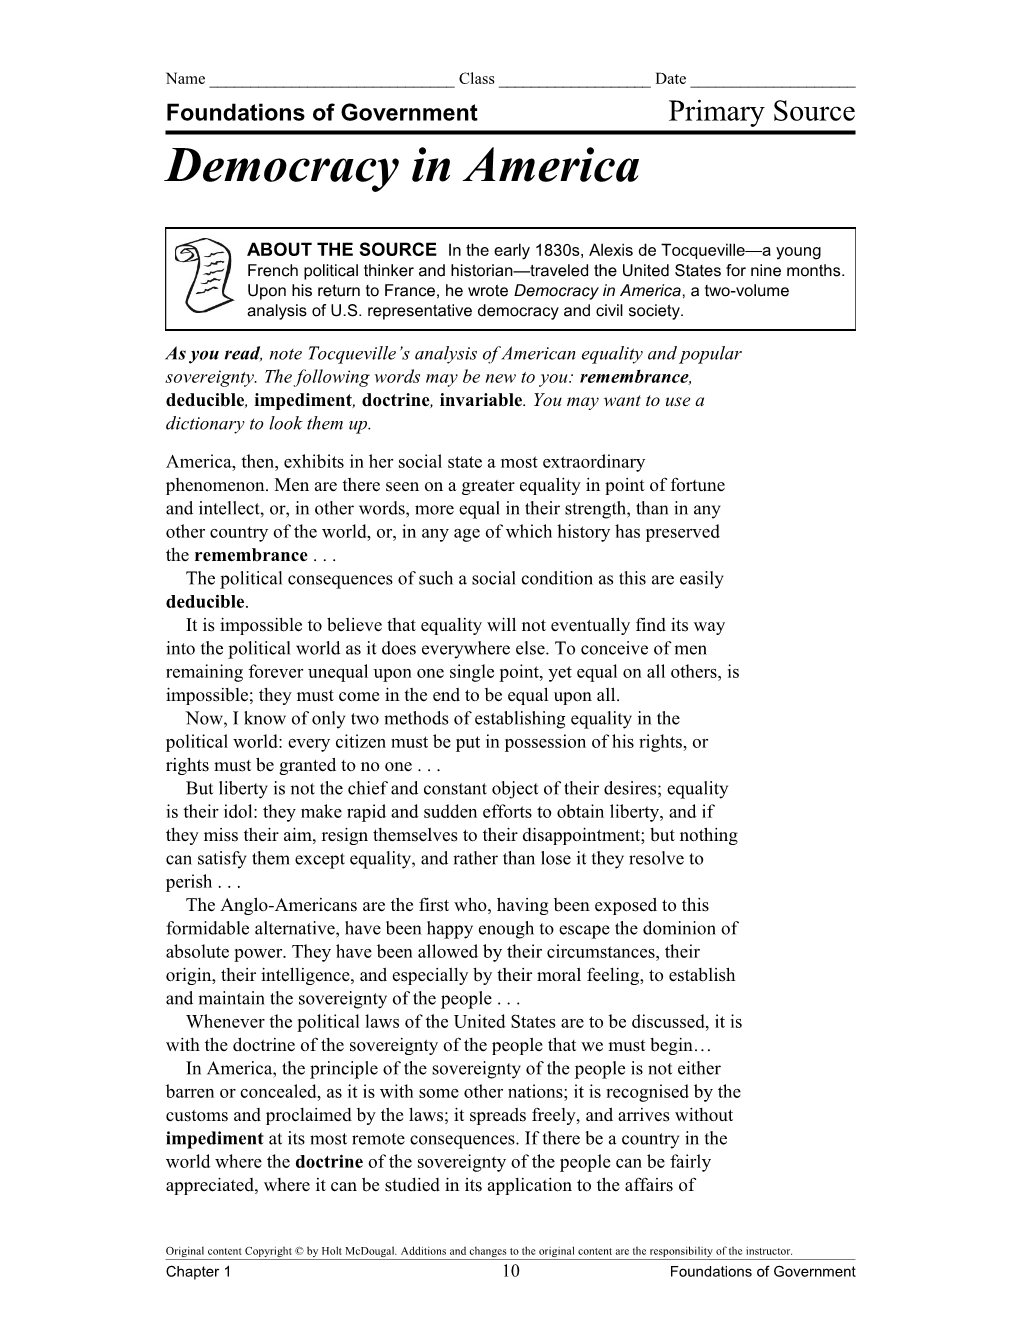 Democracy in Americacontinuedprimary Source